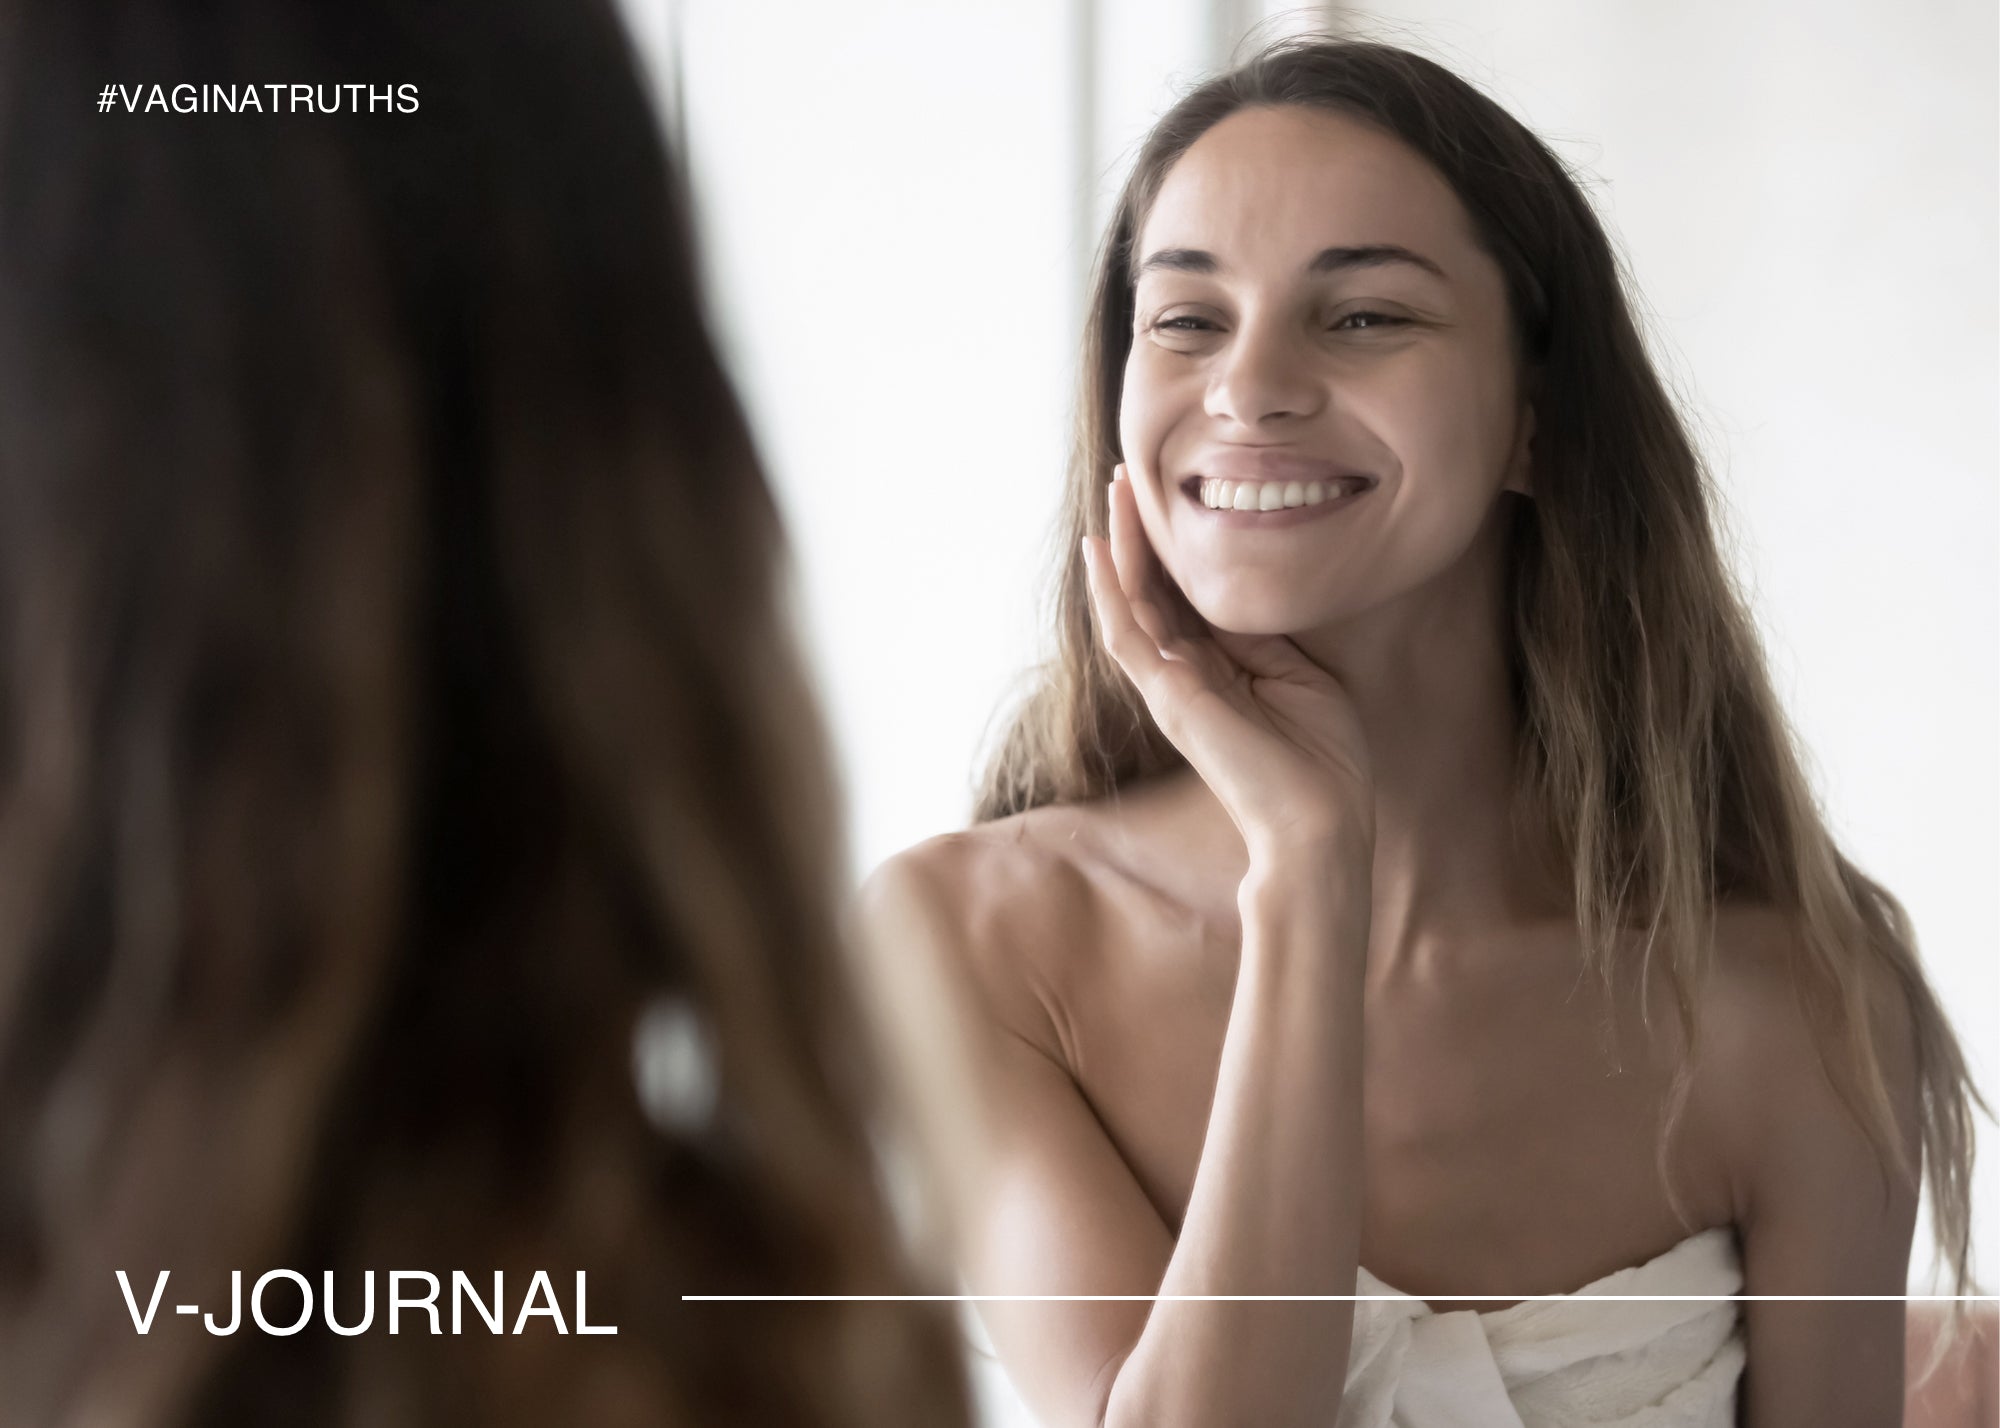 Woman with good skin smiling at herself in the mirror